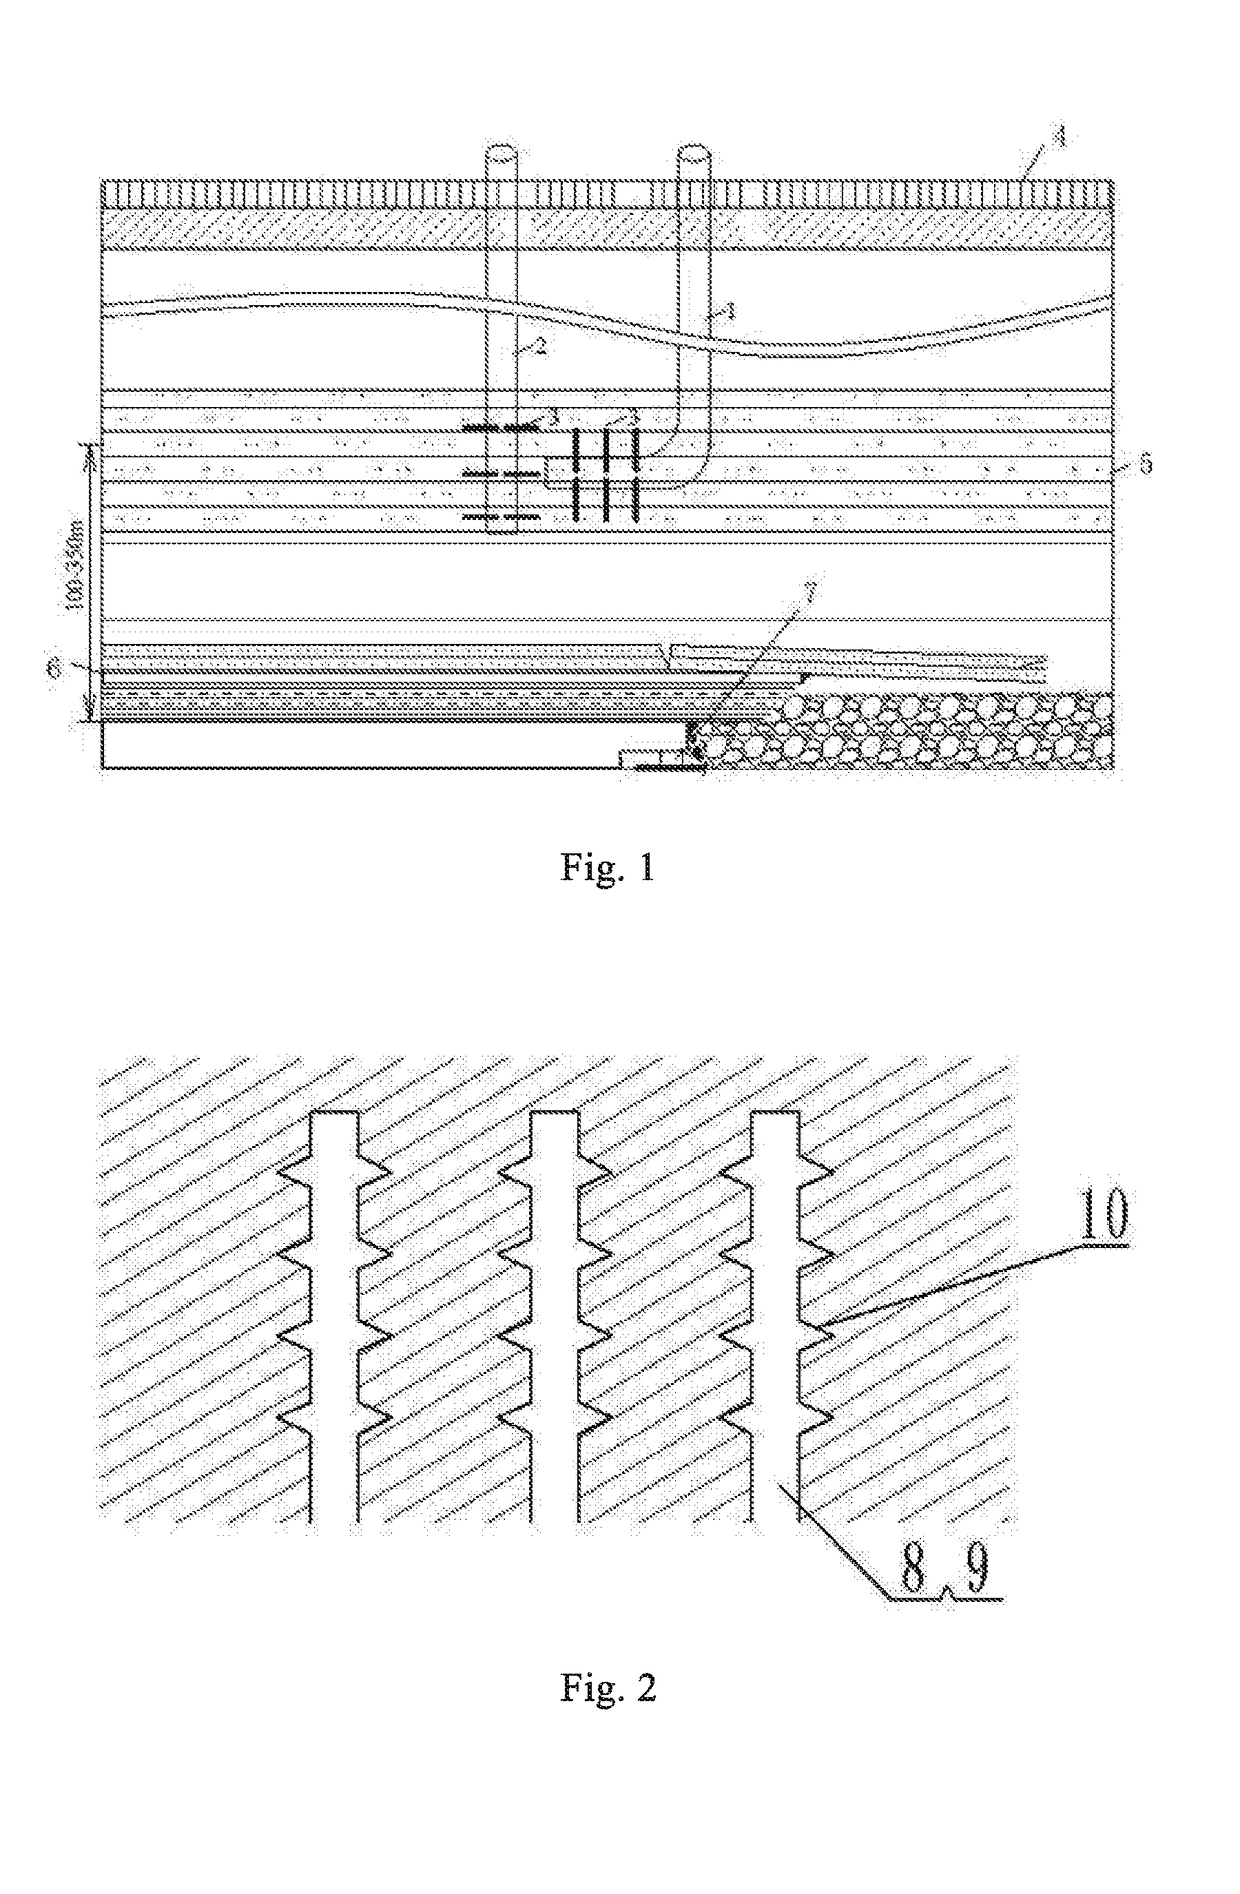 Method for over-pit and under-pit cooperative control of roofs of far and near fields of an extra-large stoping space